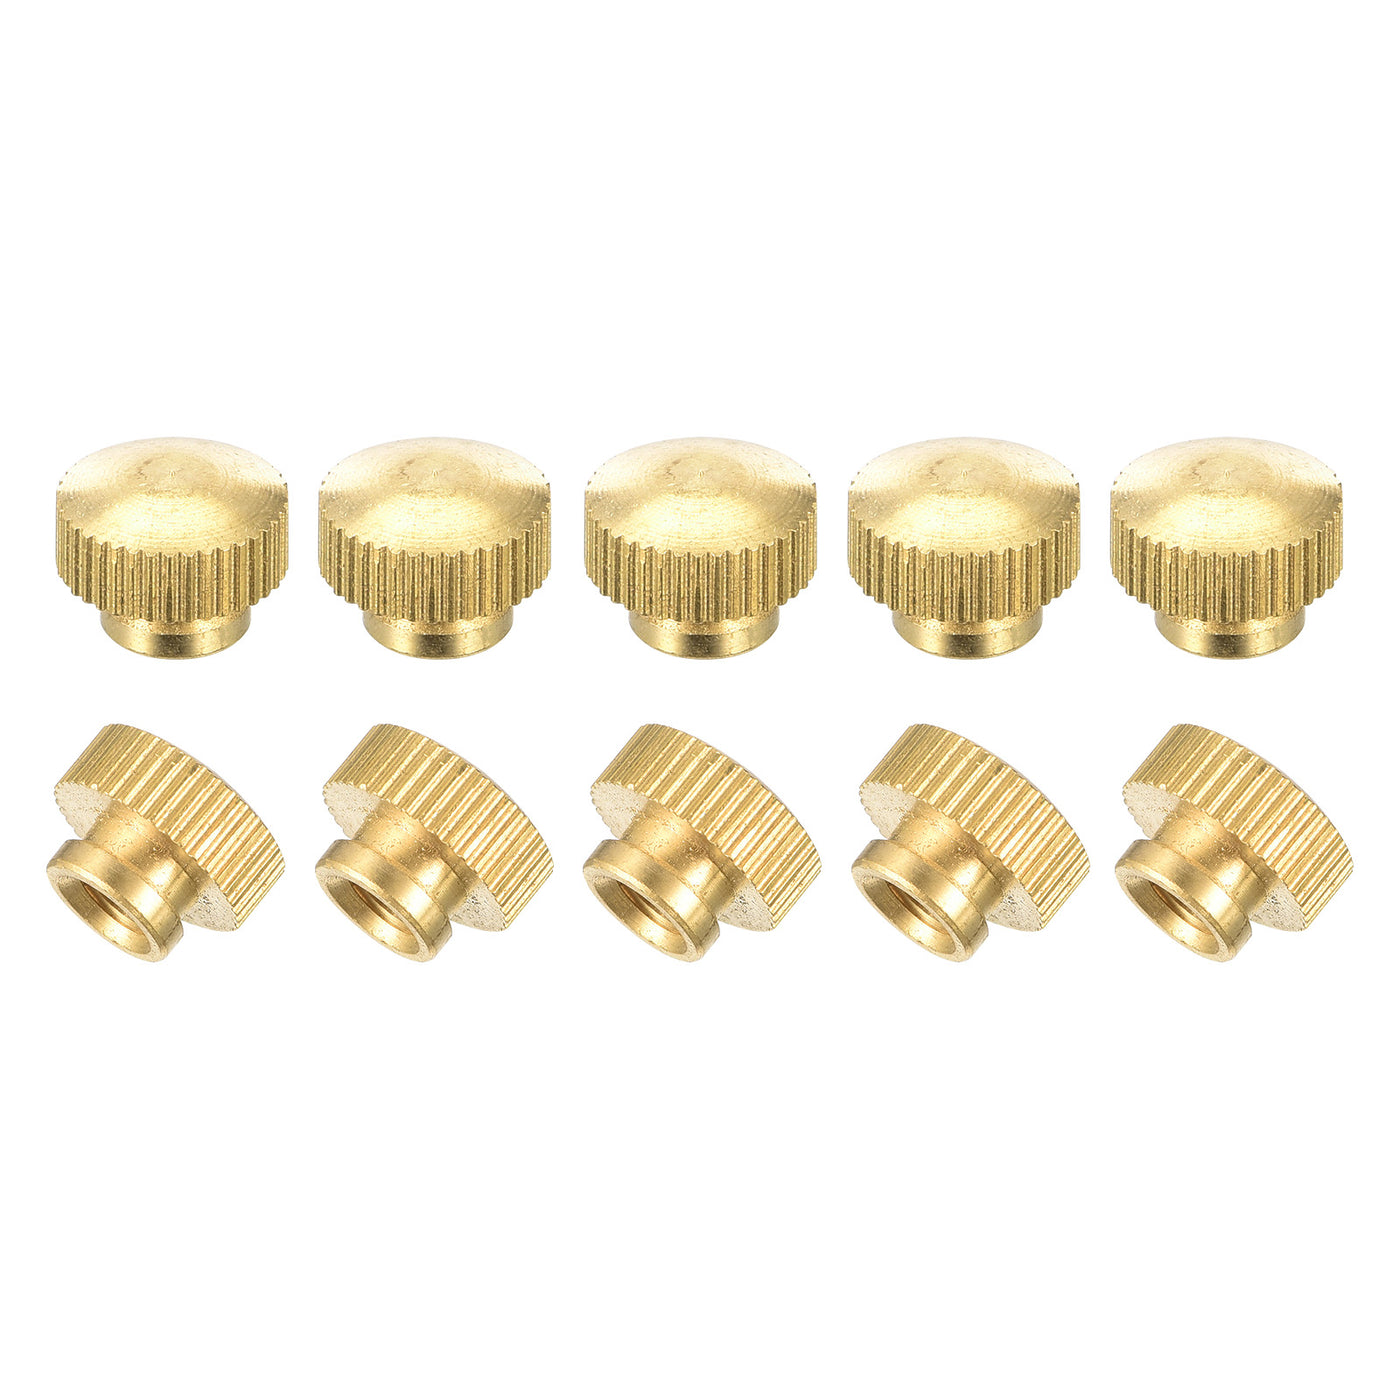 uxcell Uxcell Brass Knurled Thumb Nuts, M5x0.8mm Round Stepped Knobs Fasteners for 3D Printer, Electronic Equipment 24Pcs